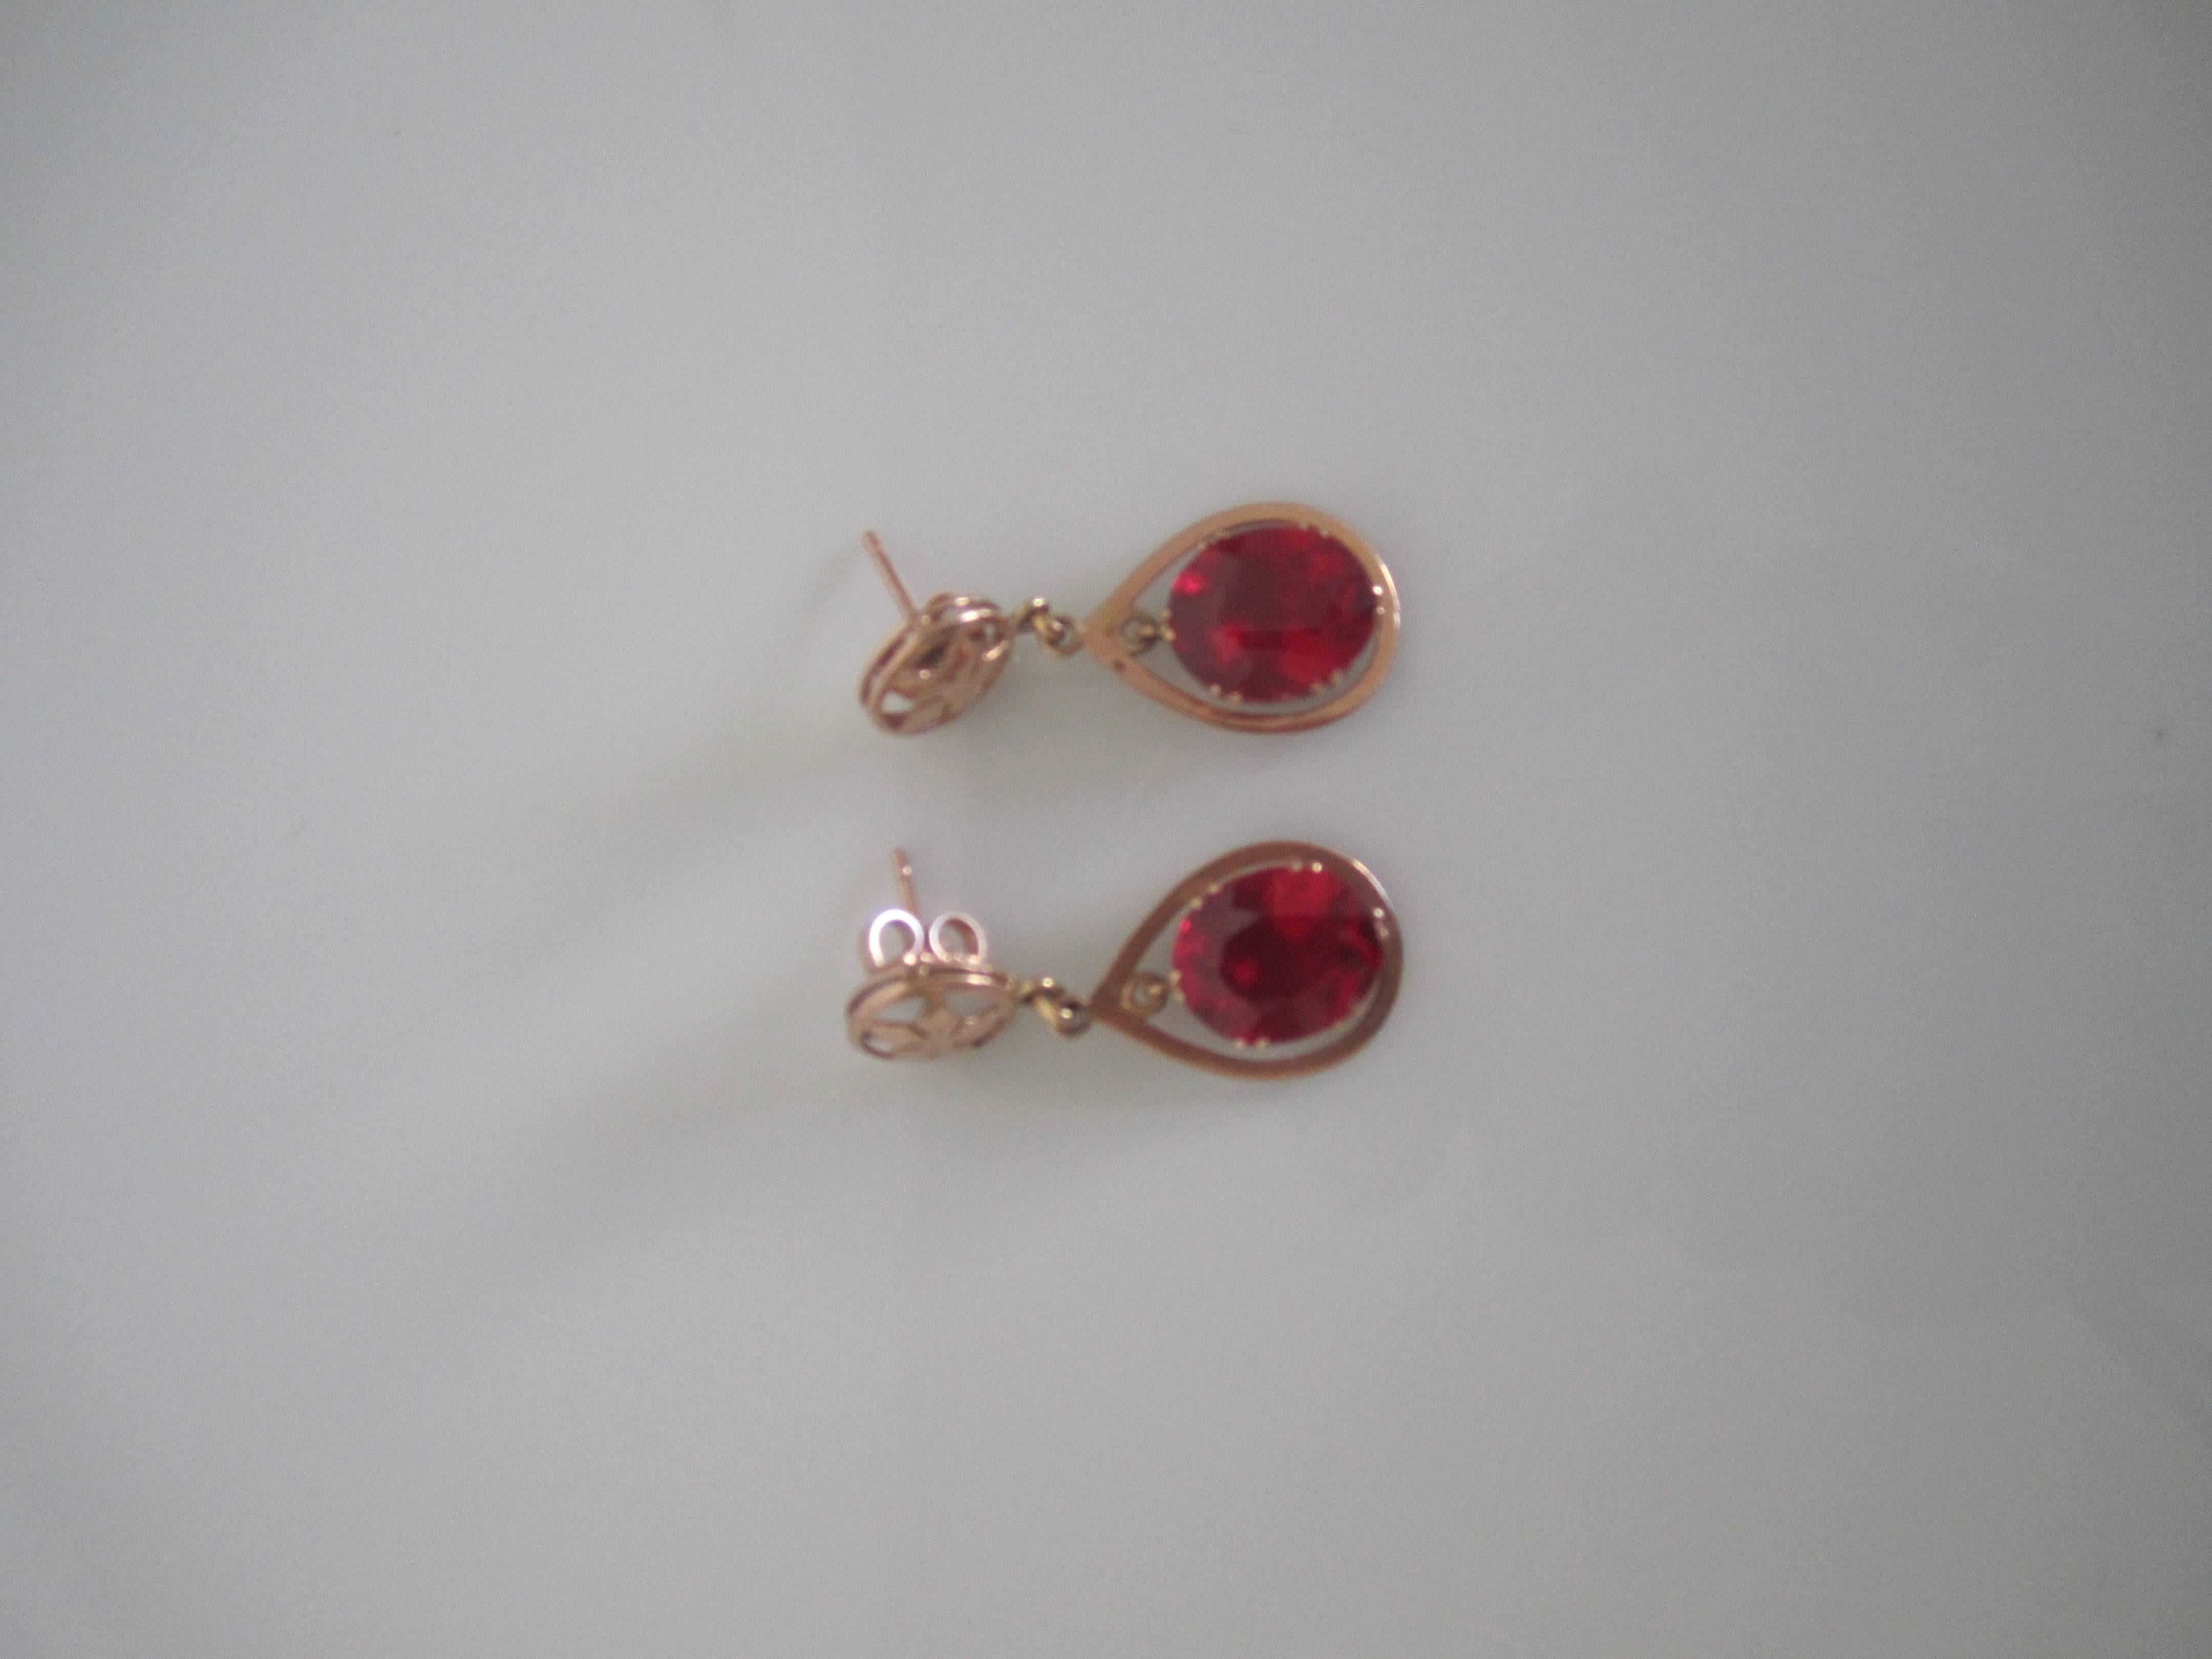 Vintage 14-Karat Pink Gold Earrings with Red Ruby Style Stones 2